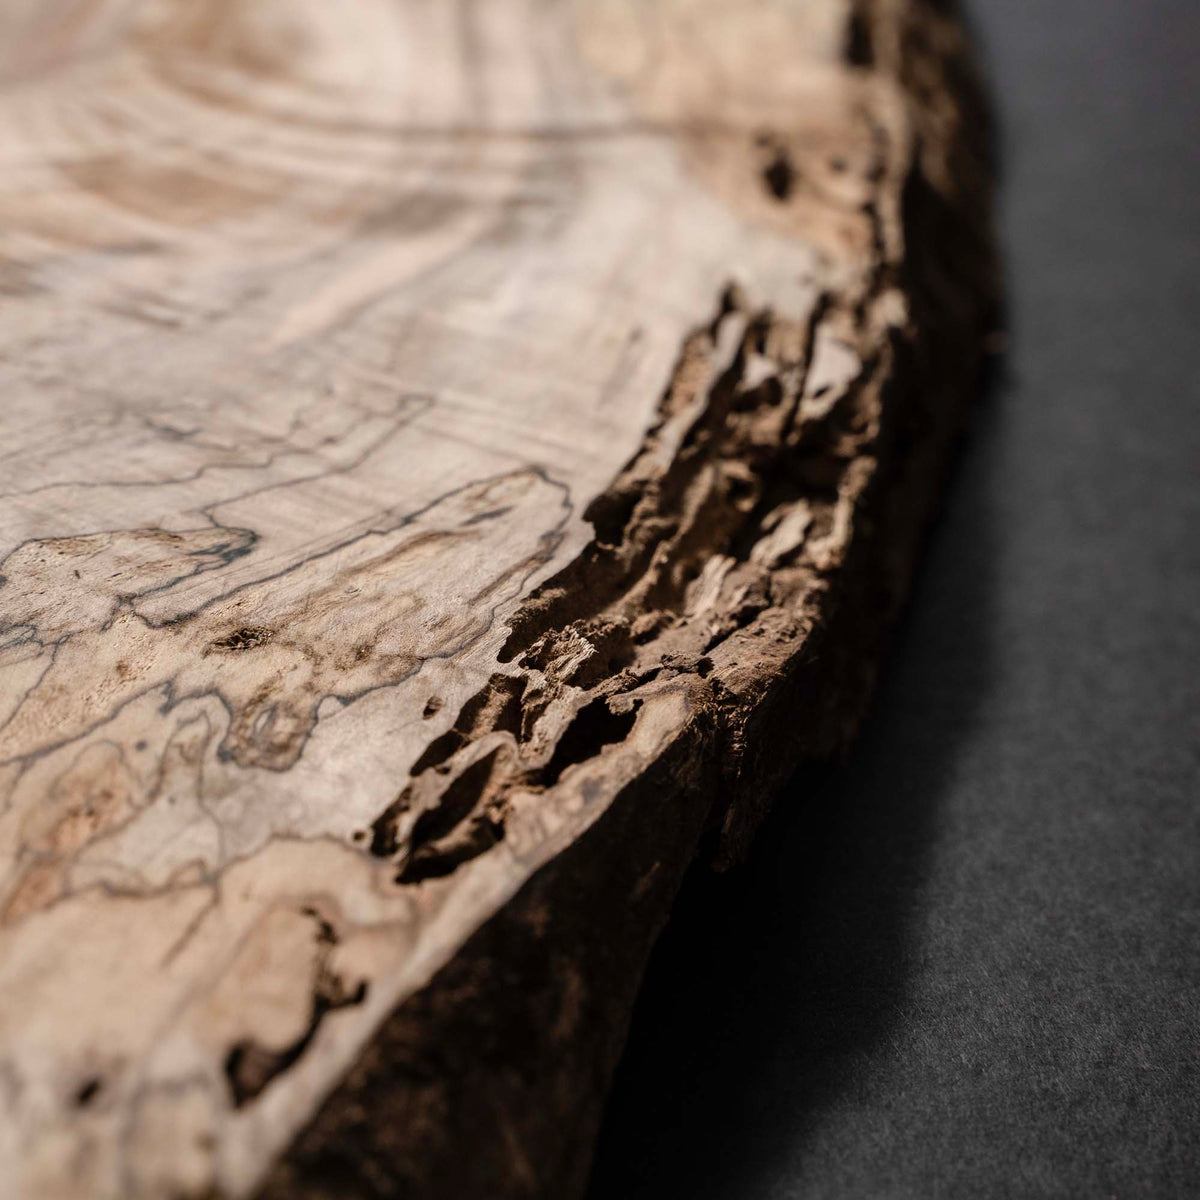 4/4 1” Live Edge Spalted Hard Maple Wood Boards - Kiln Dried - Dimensional Lumber - Cut To Size Board - DIY Wood Project Boards